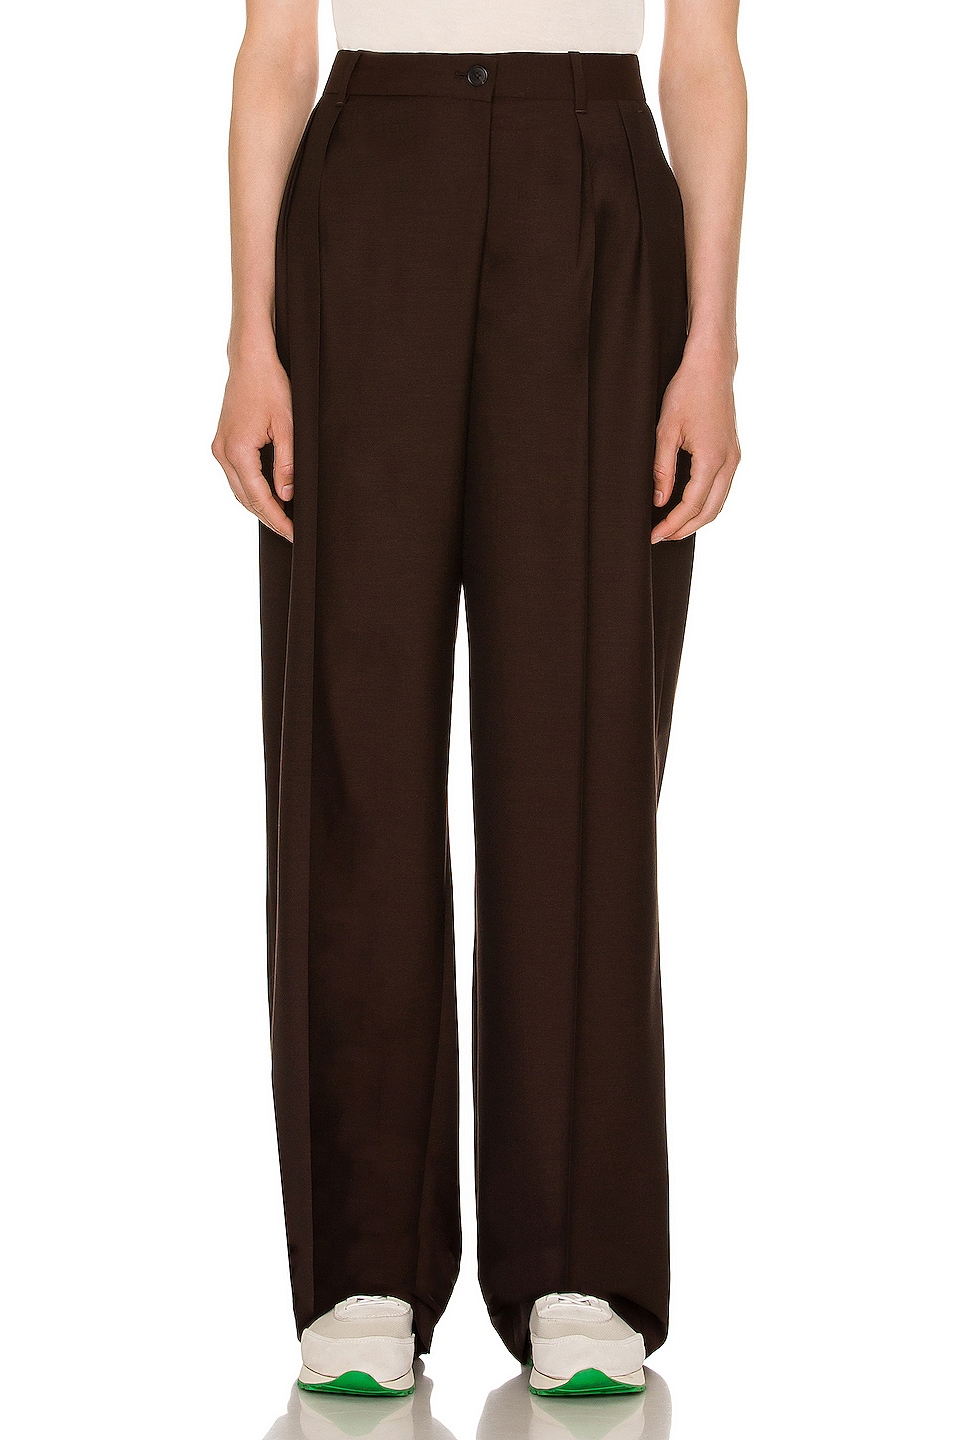 Image 1 of The Row Willow Pant in Dark Chocolate